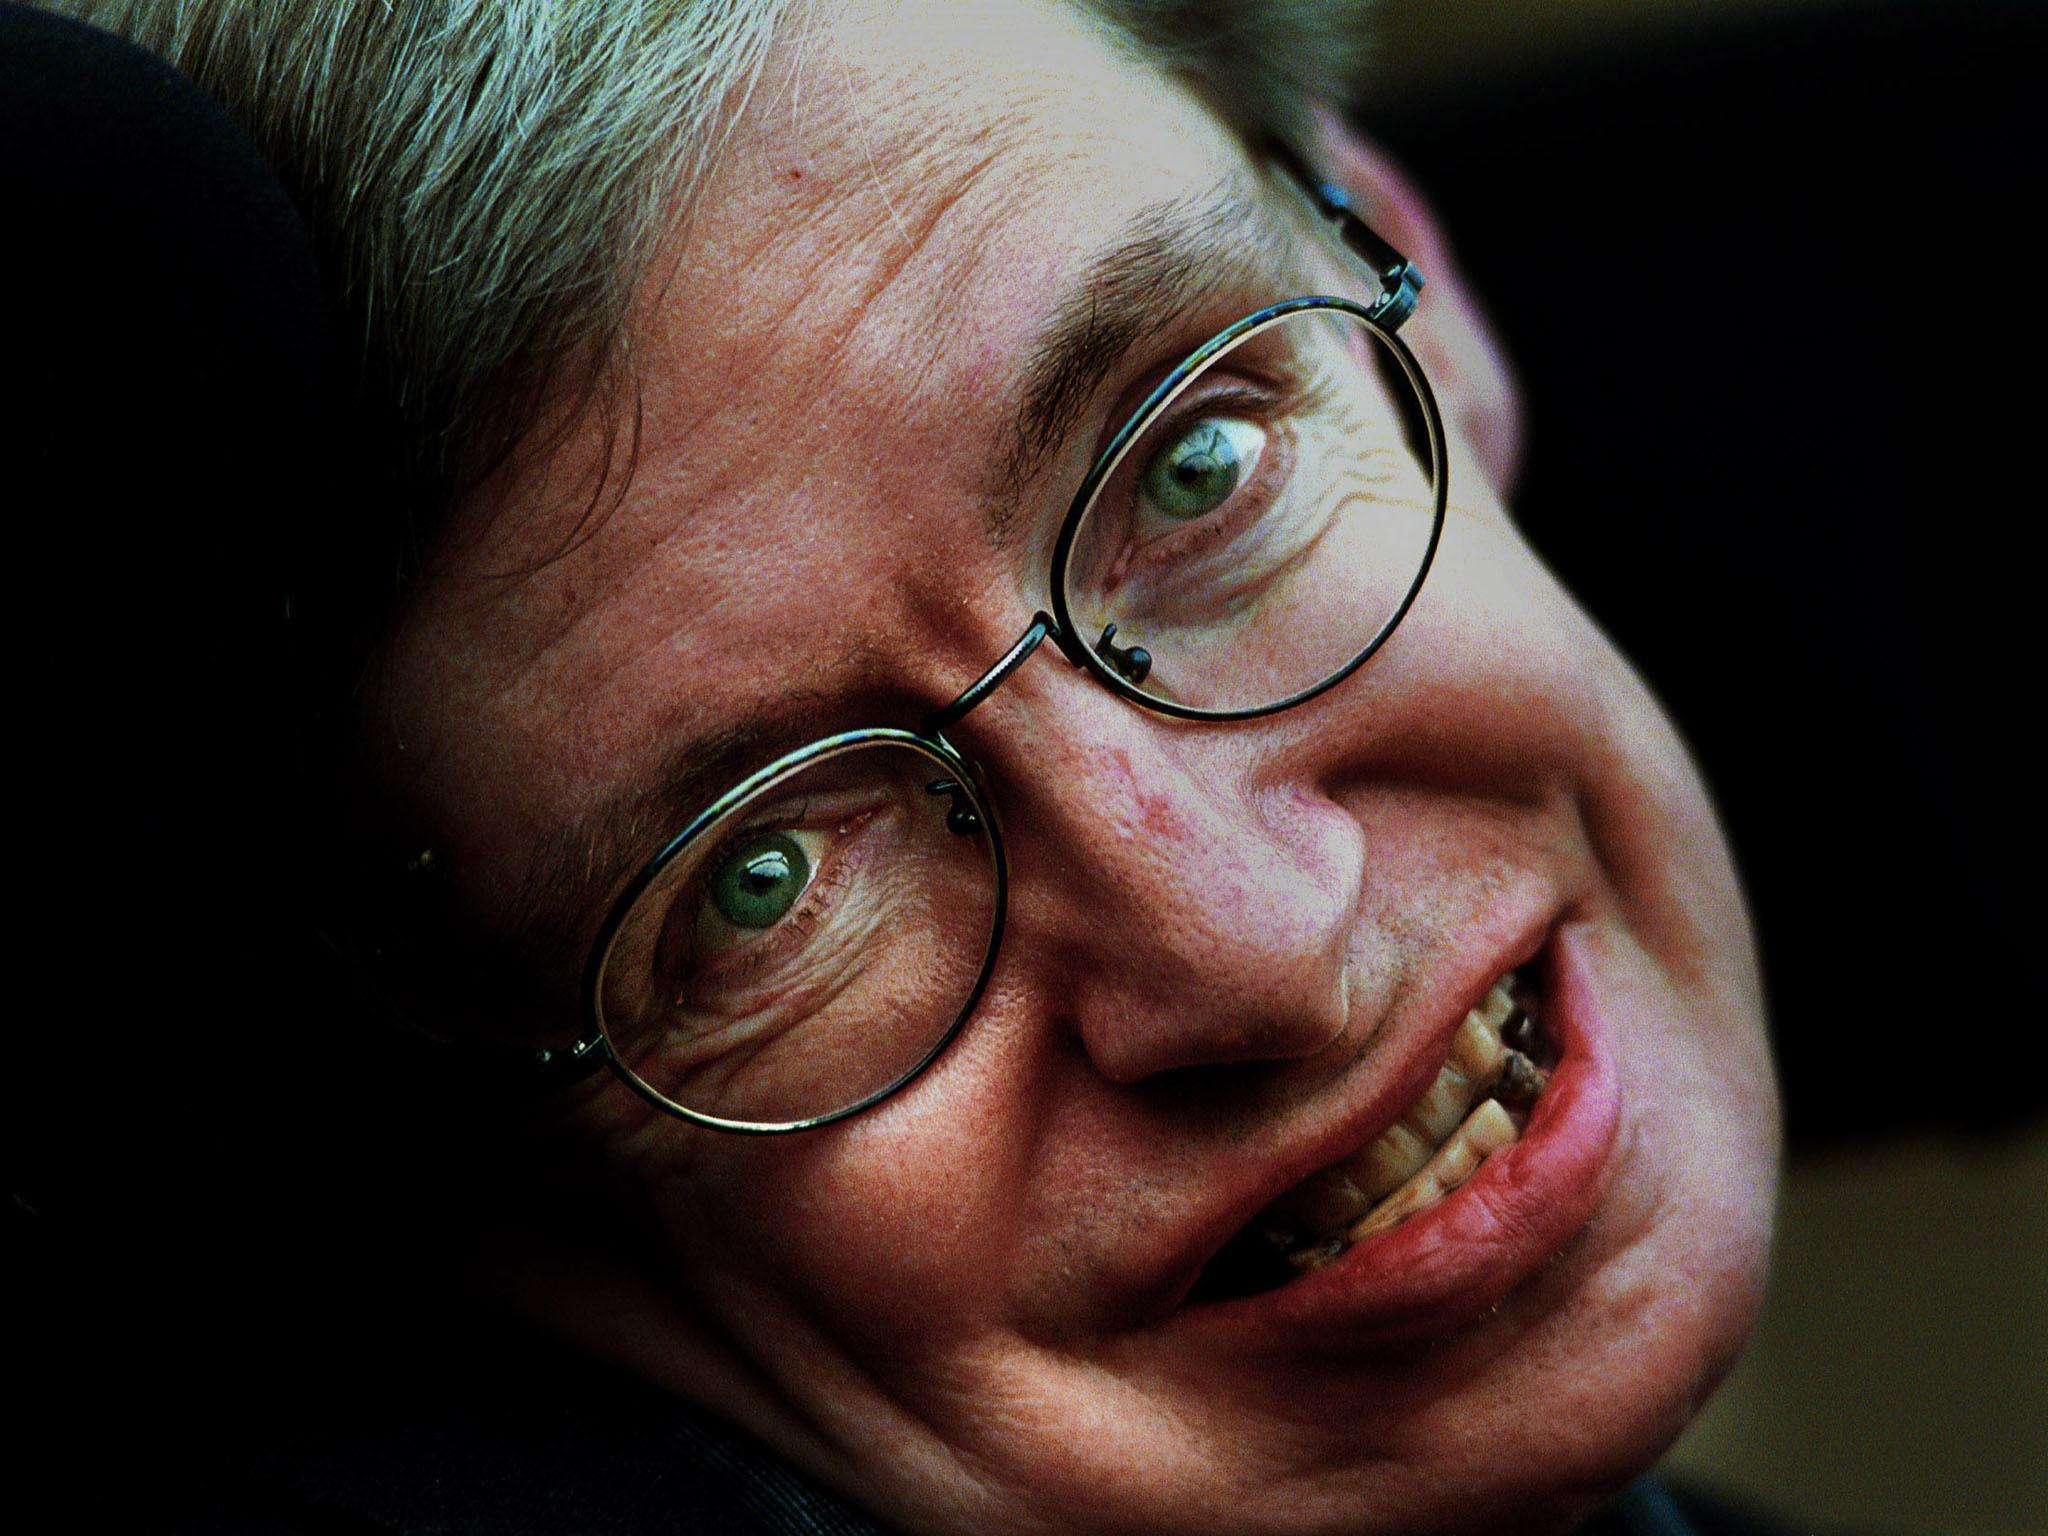 Stephen Hawking has died at the age of 76